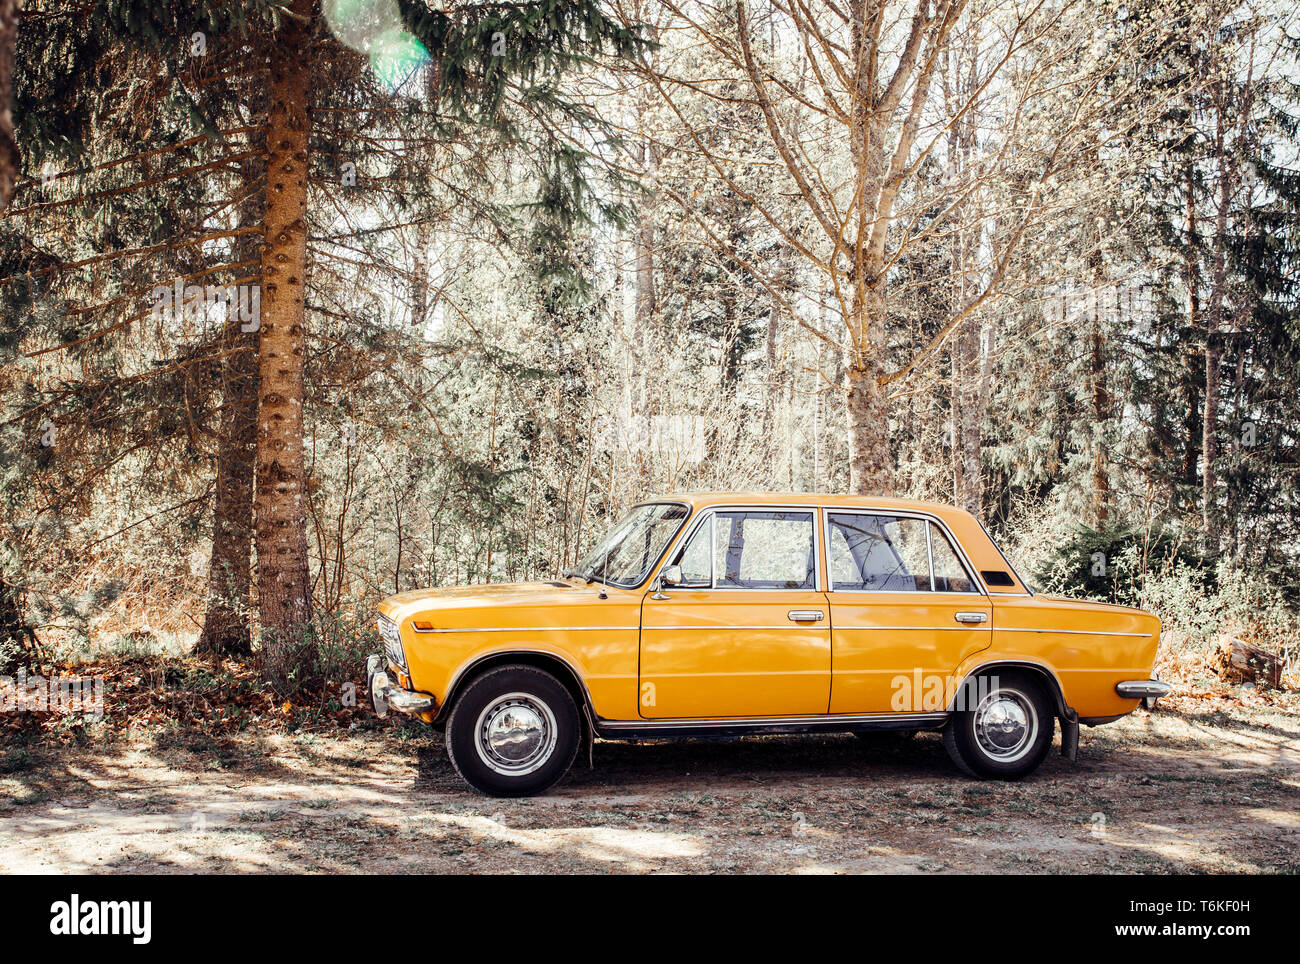 Tallinn,Harjumaa/Estonia-01MAY2019: Perfect condition retro car LADA 1600 (from year 1977) parked by the dirt road, next to forest, nature outdoors in Stock Photo